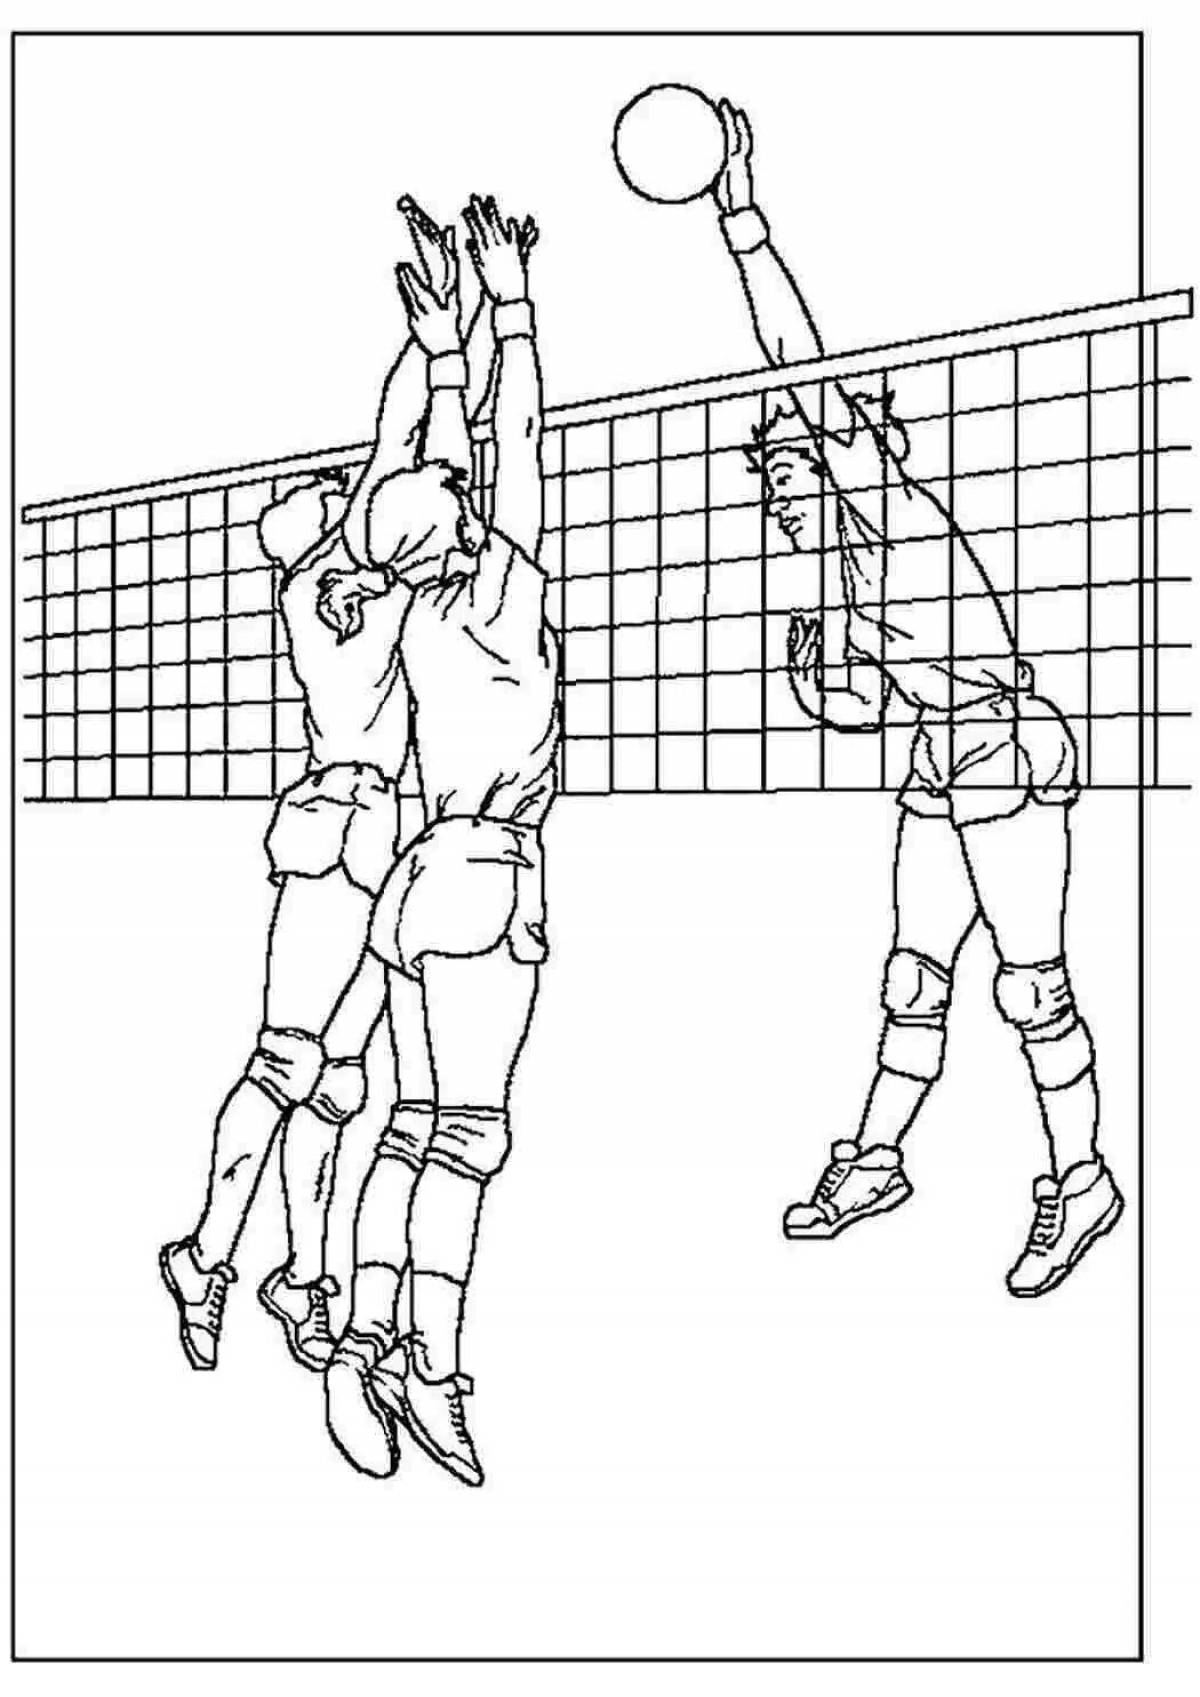 Creative volleyball coloring book for kids